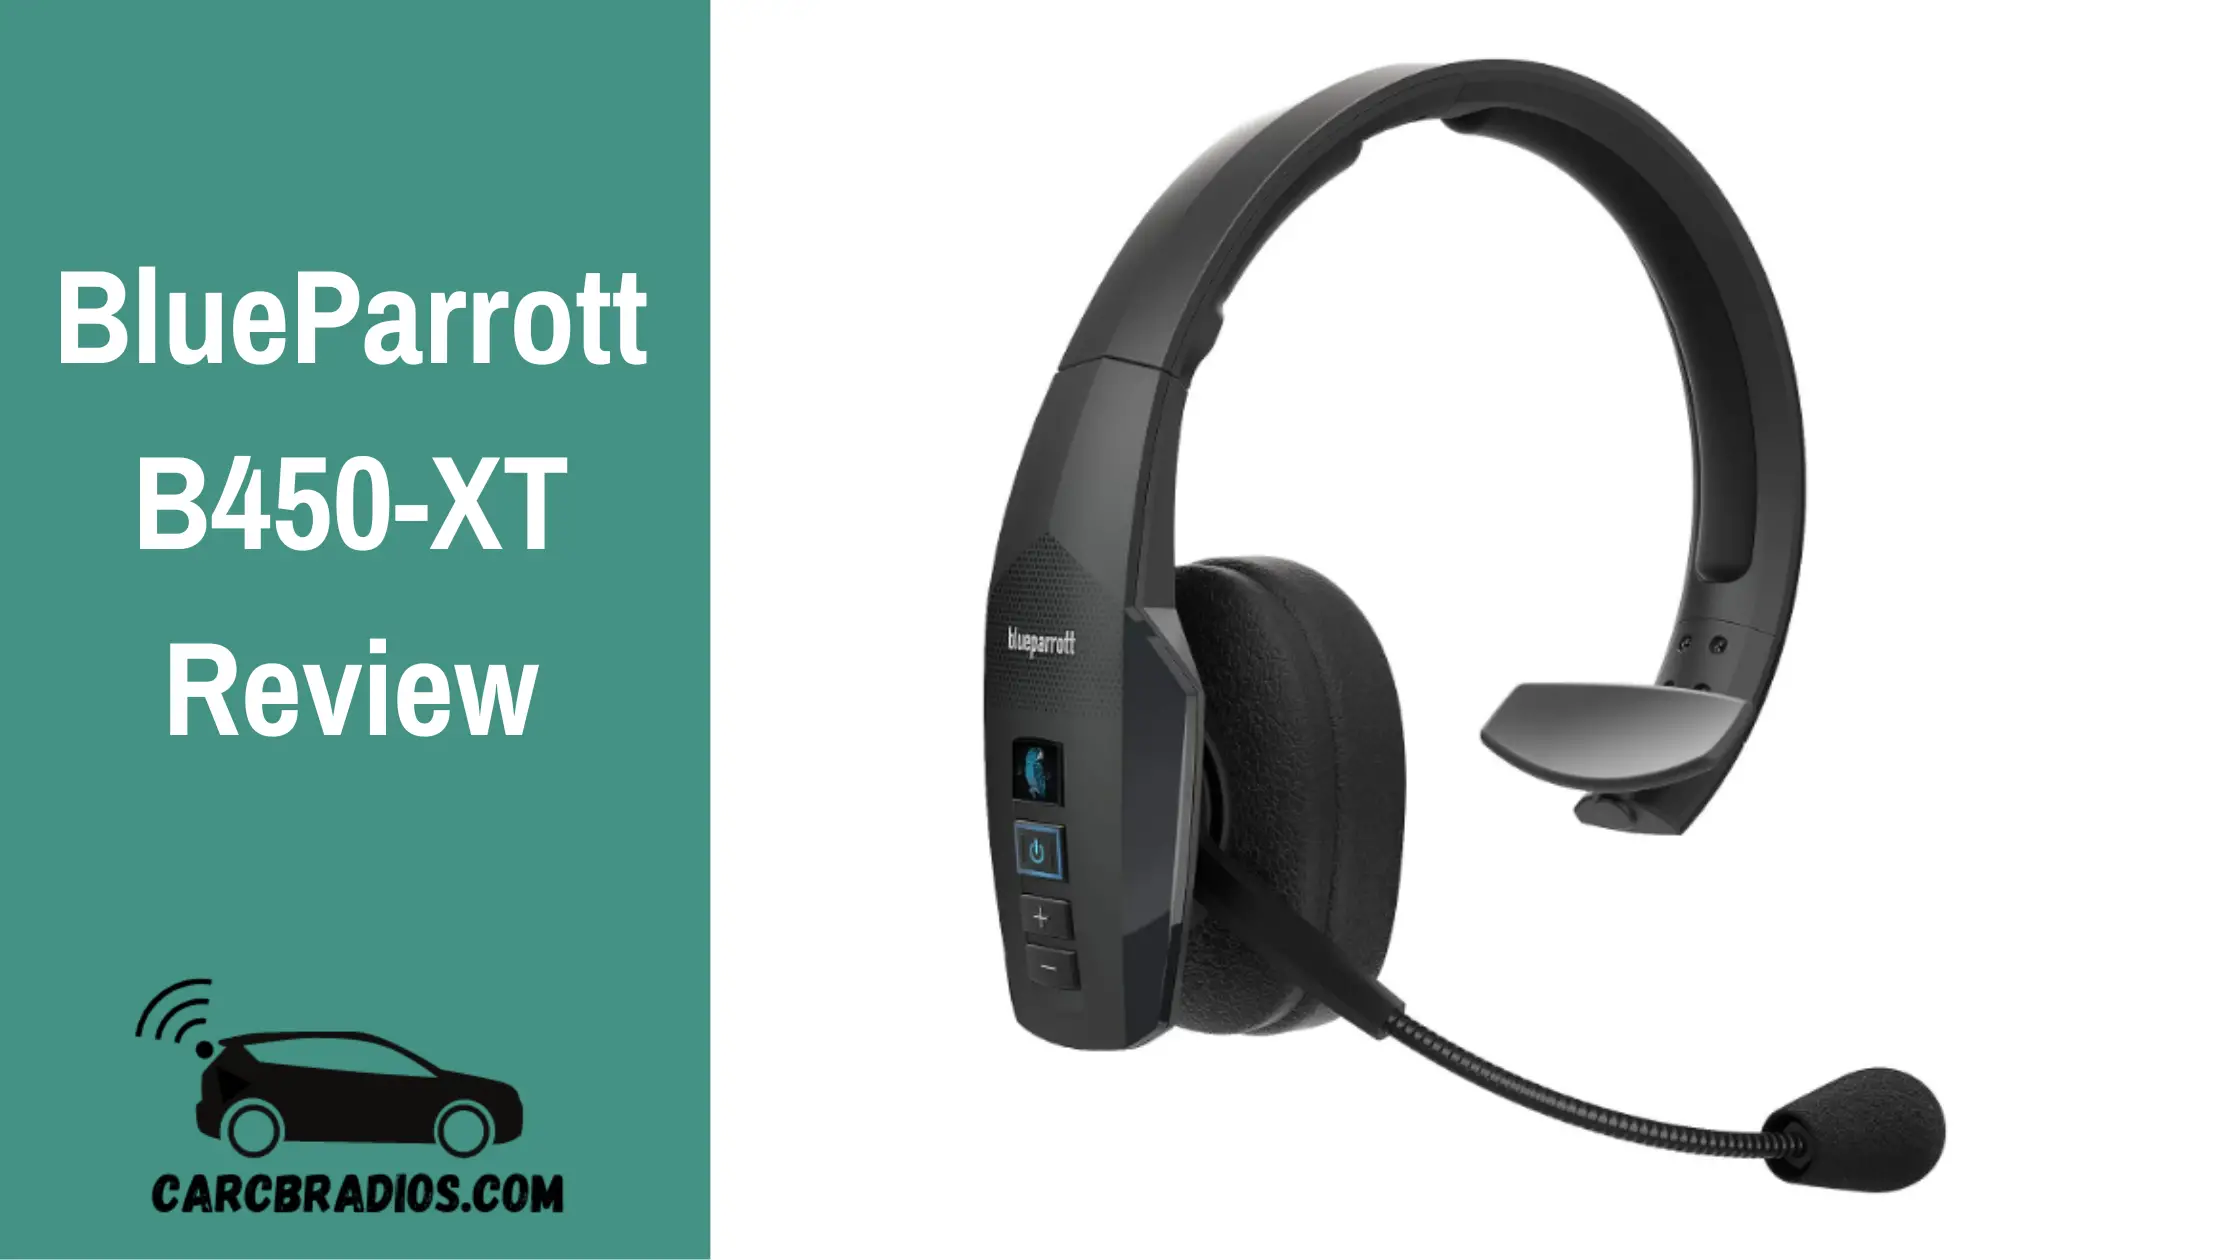 If you're looking for a durable, comfortable, and high-performing wireless headset for use with Microsoft Teams Walkie Talkie, the BlueParrott B450-XT MS Bluetooth Headset is definitely worth considering. With its long wireless range, impressive noise cancellation, and easy-to-use features, it's a great choice for busy professionals.